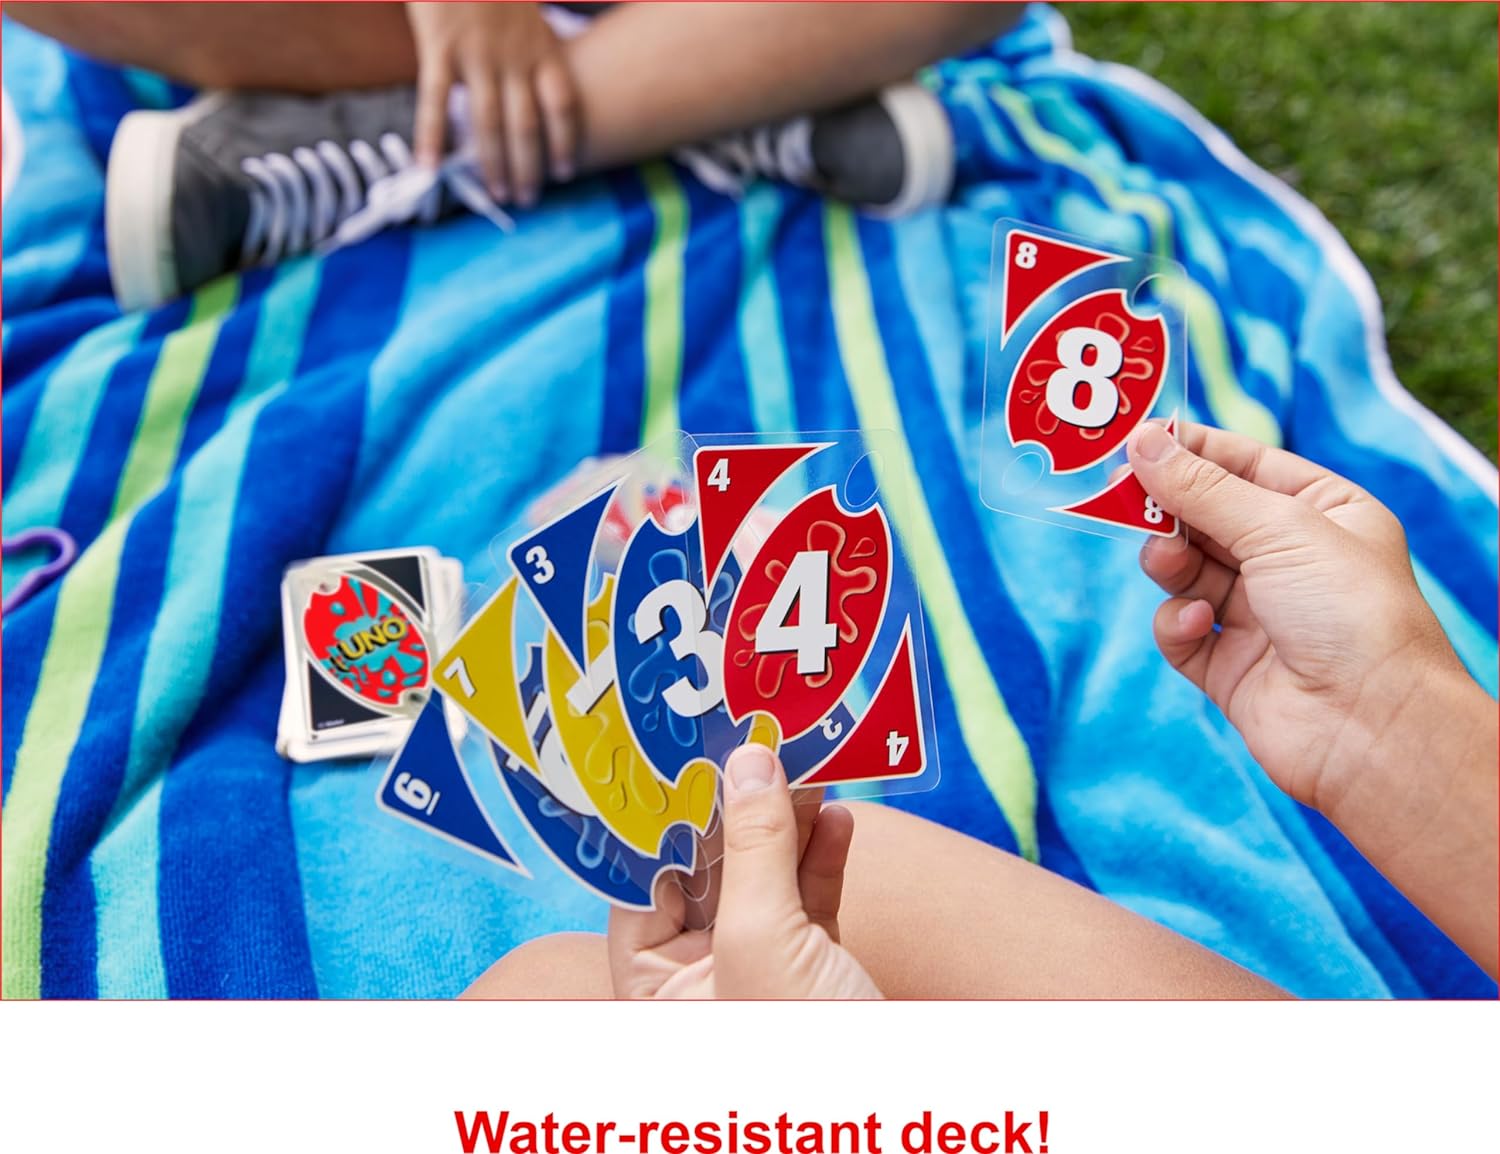 Mattel Games UNO Splash Card Game with Waterproof Cards and Portable Clip for Travel, Camping and Game Nights Away